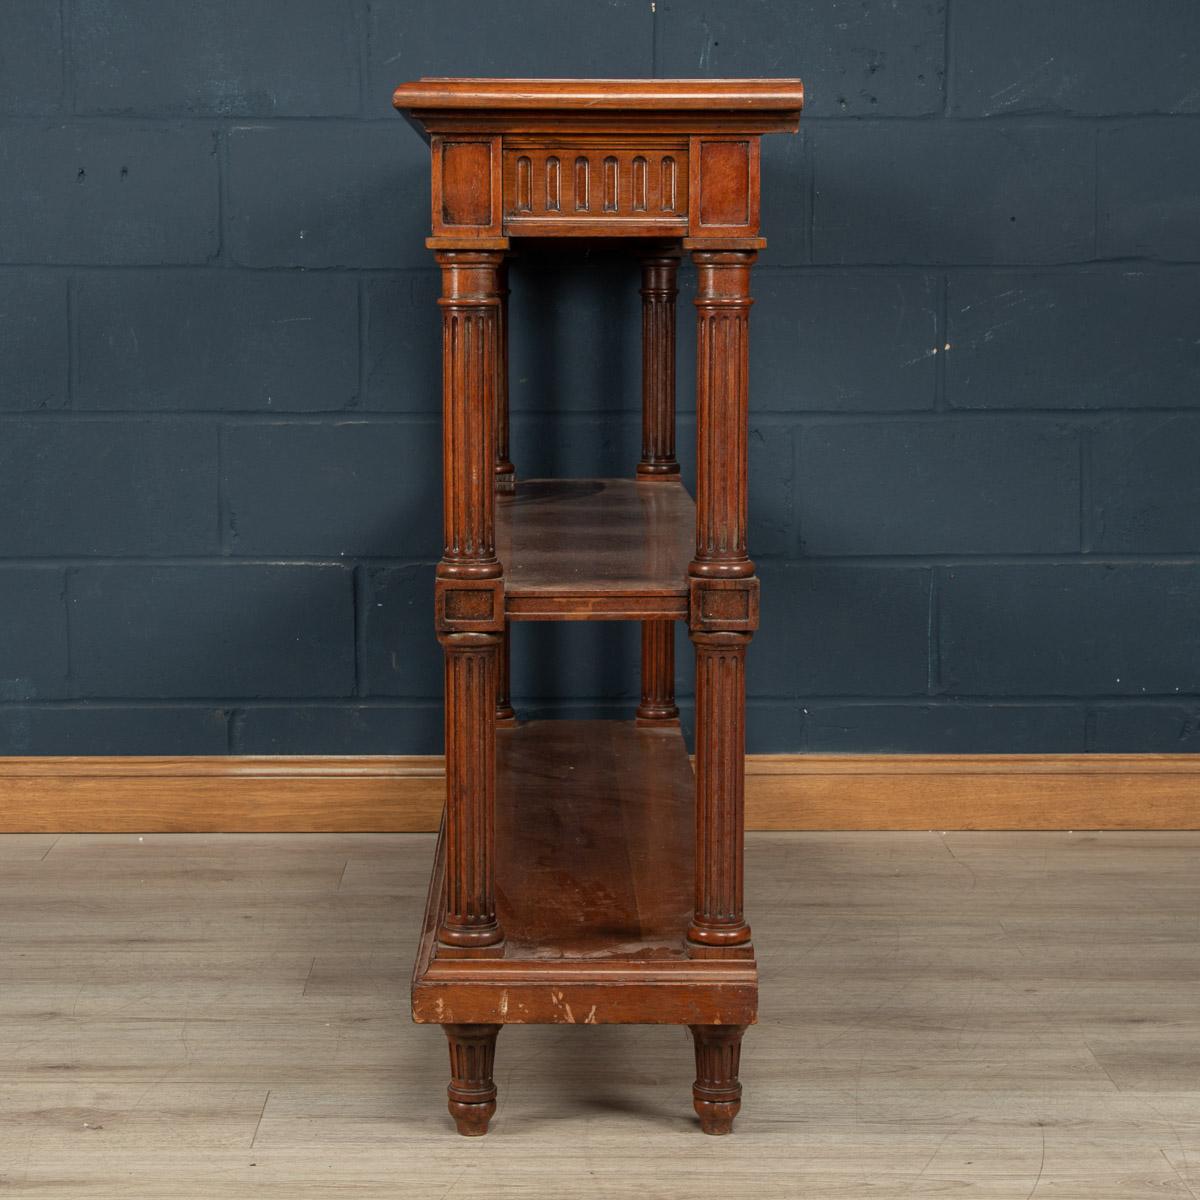 A lovely hardwood three tier dumbwaiter. This French dumbwaiter was made in France around the turn of the last century, probably in walnut and is only 40cm deep making it unusually narrow. The neoclassical design makes it a wonderfully decorative